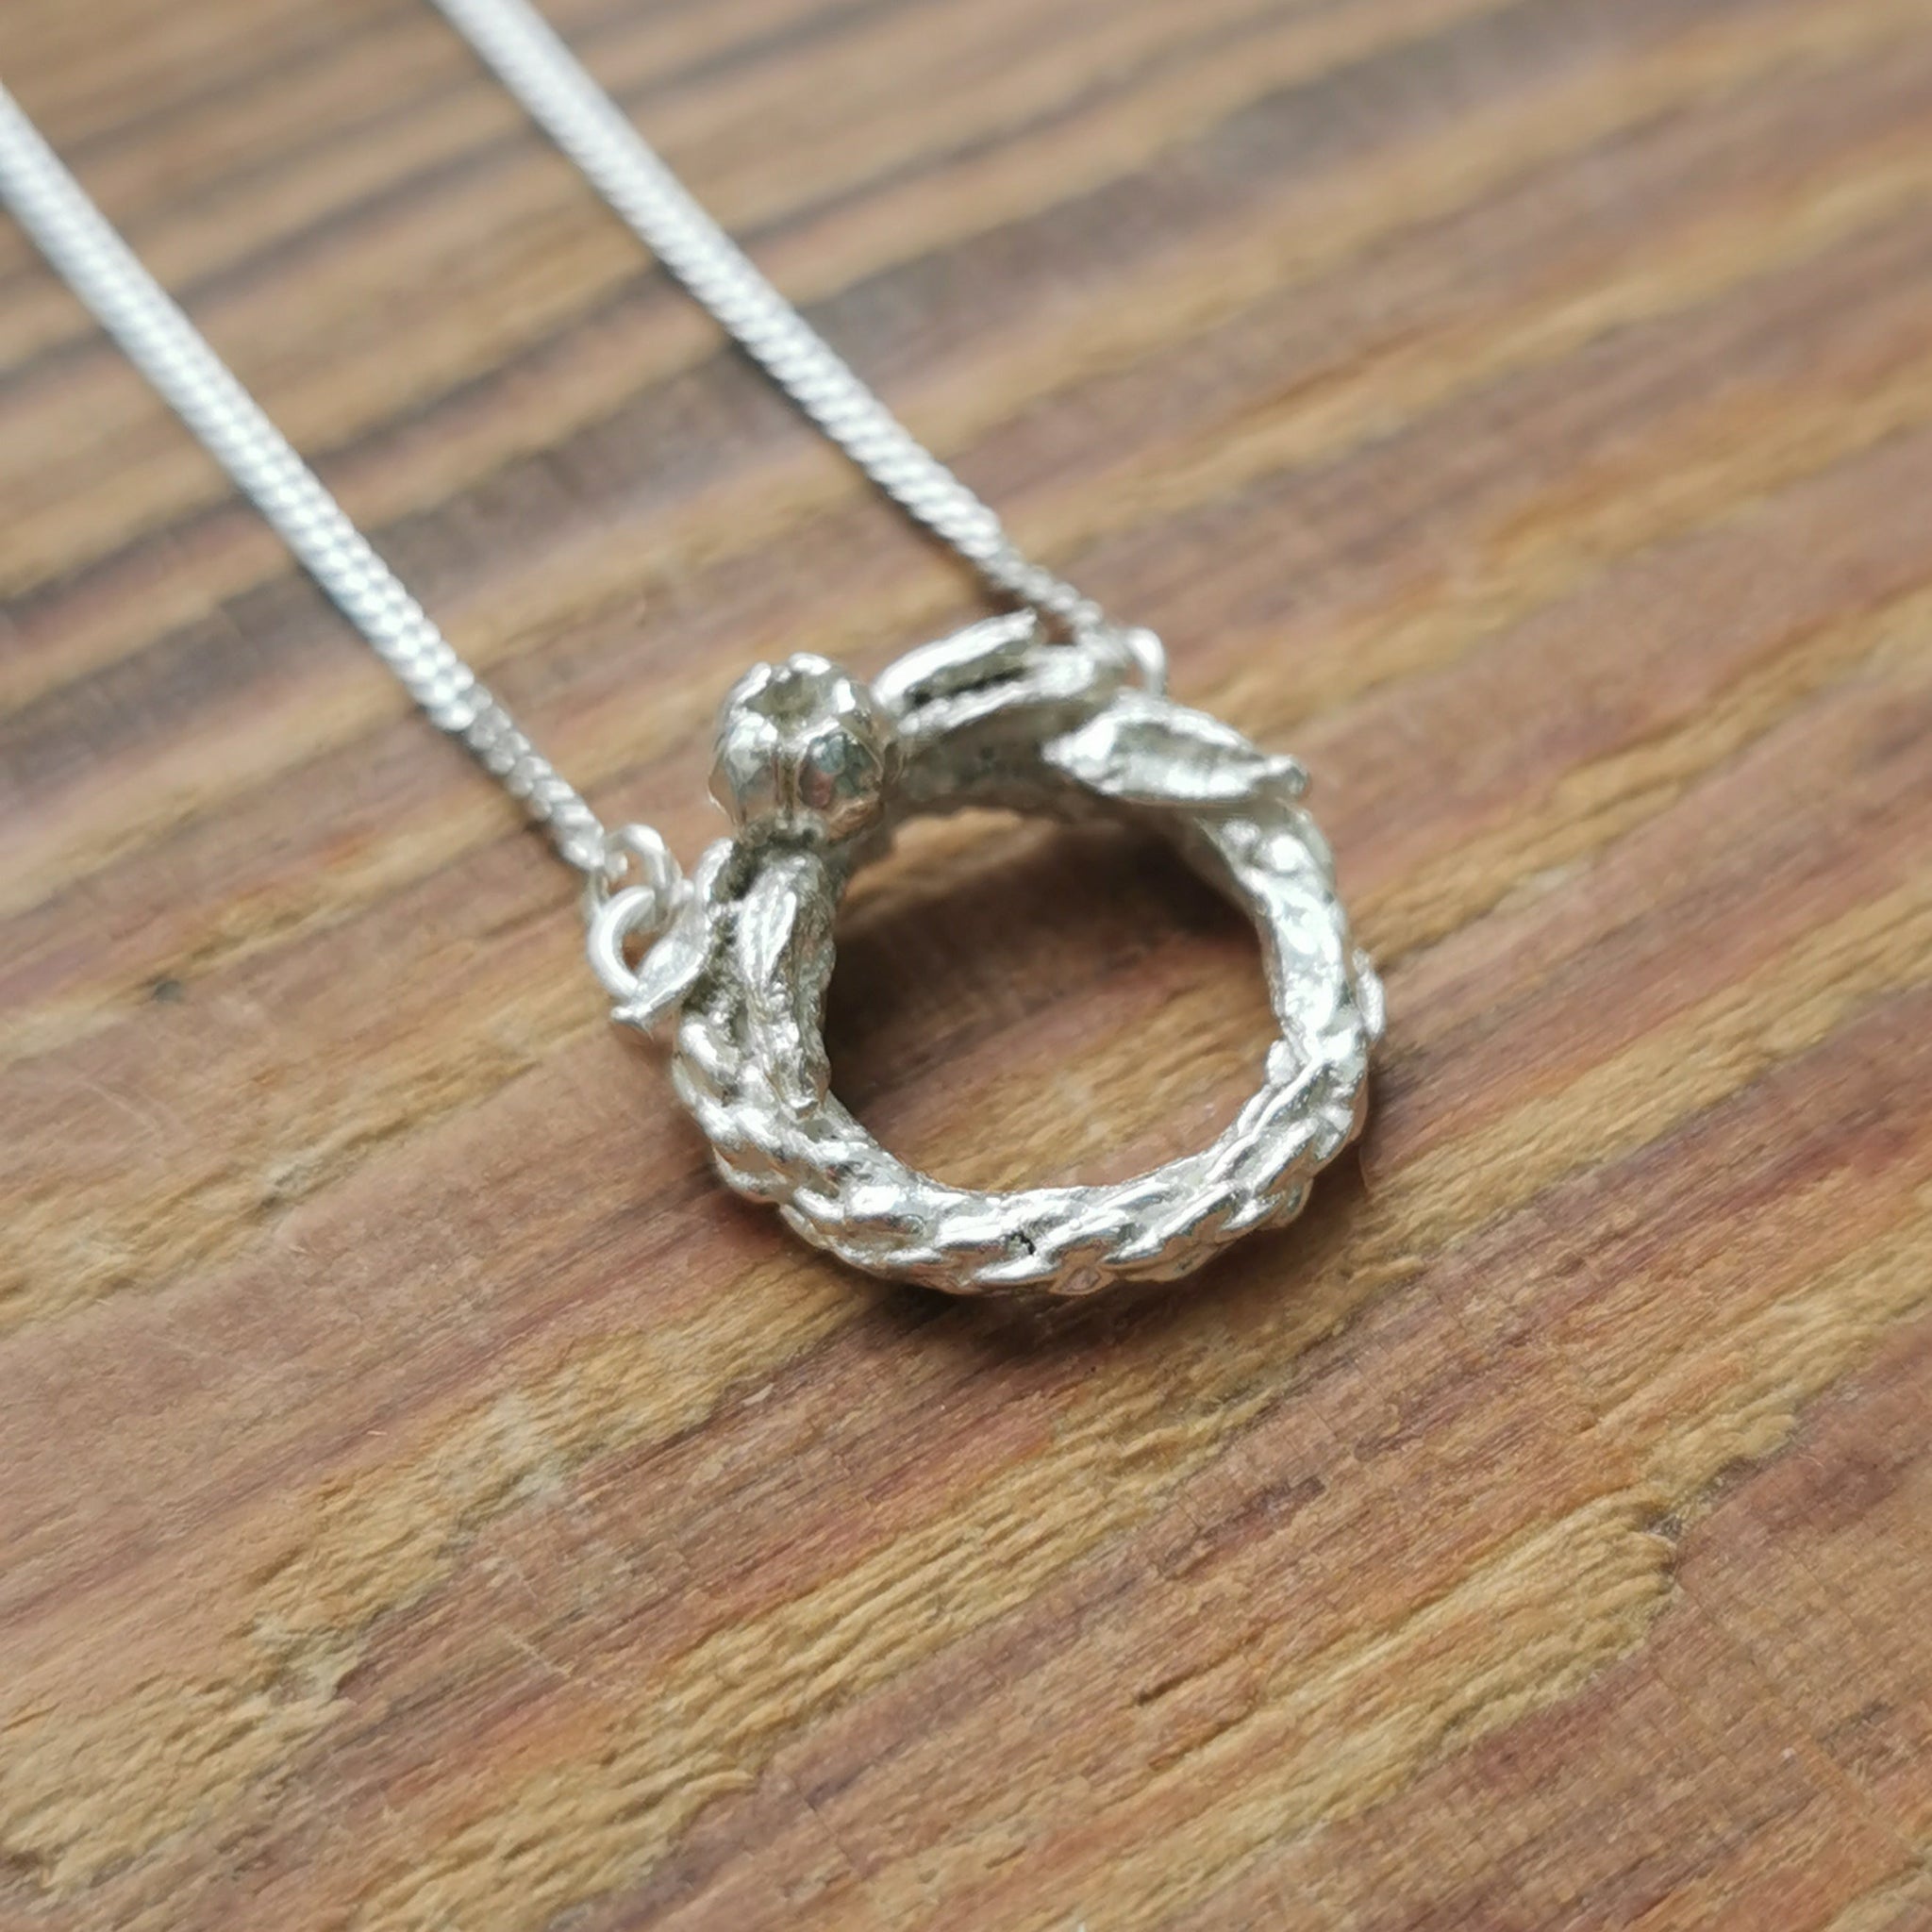 Silver Wreath and Leaf Pendant